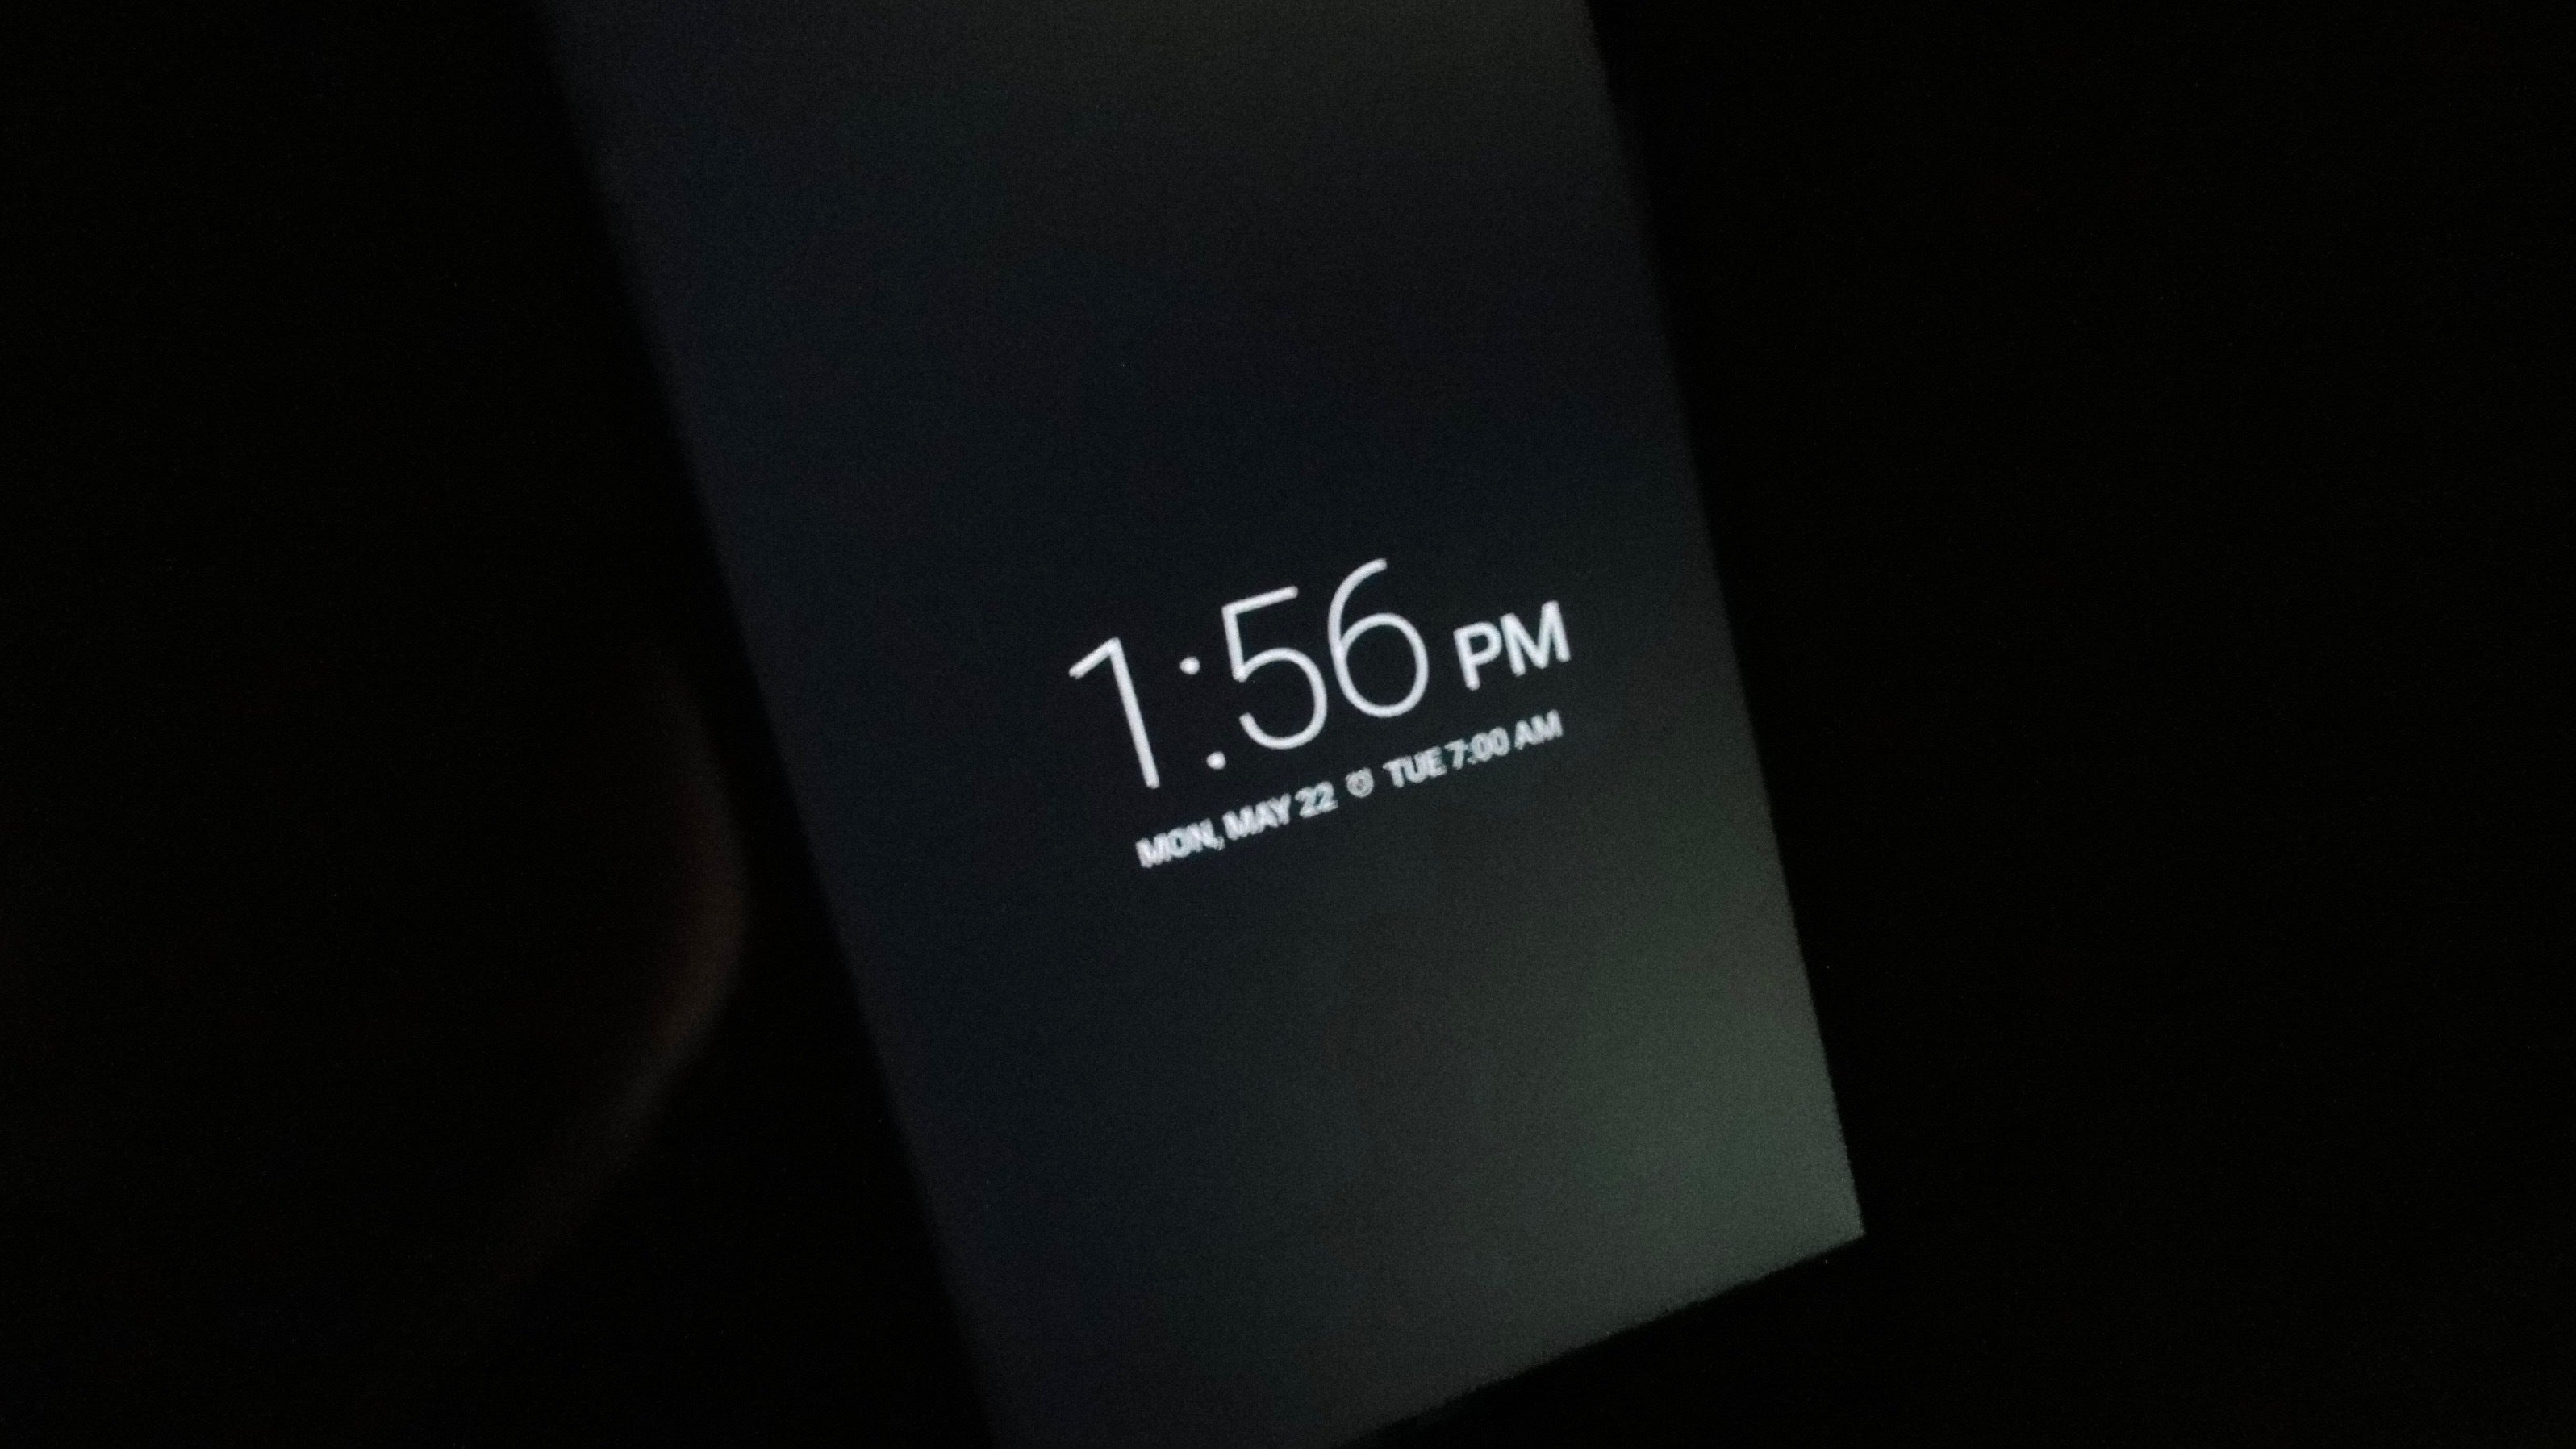 6 ways to make the most of Android's Clock app | PCWorld